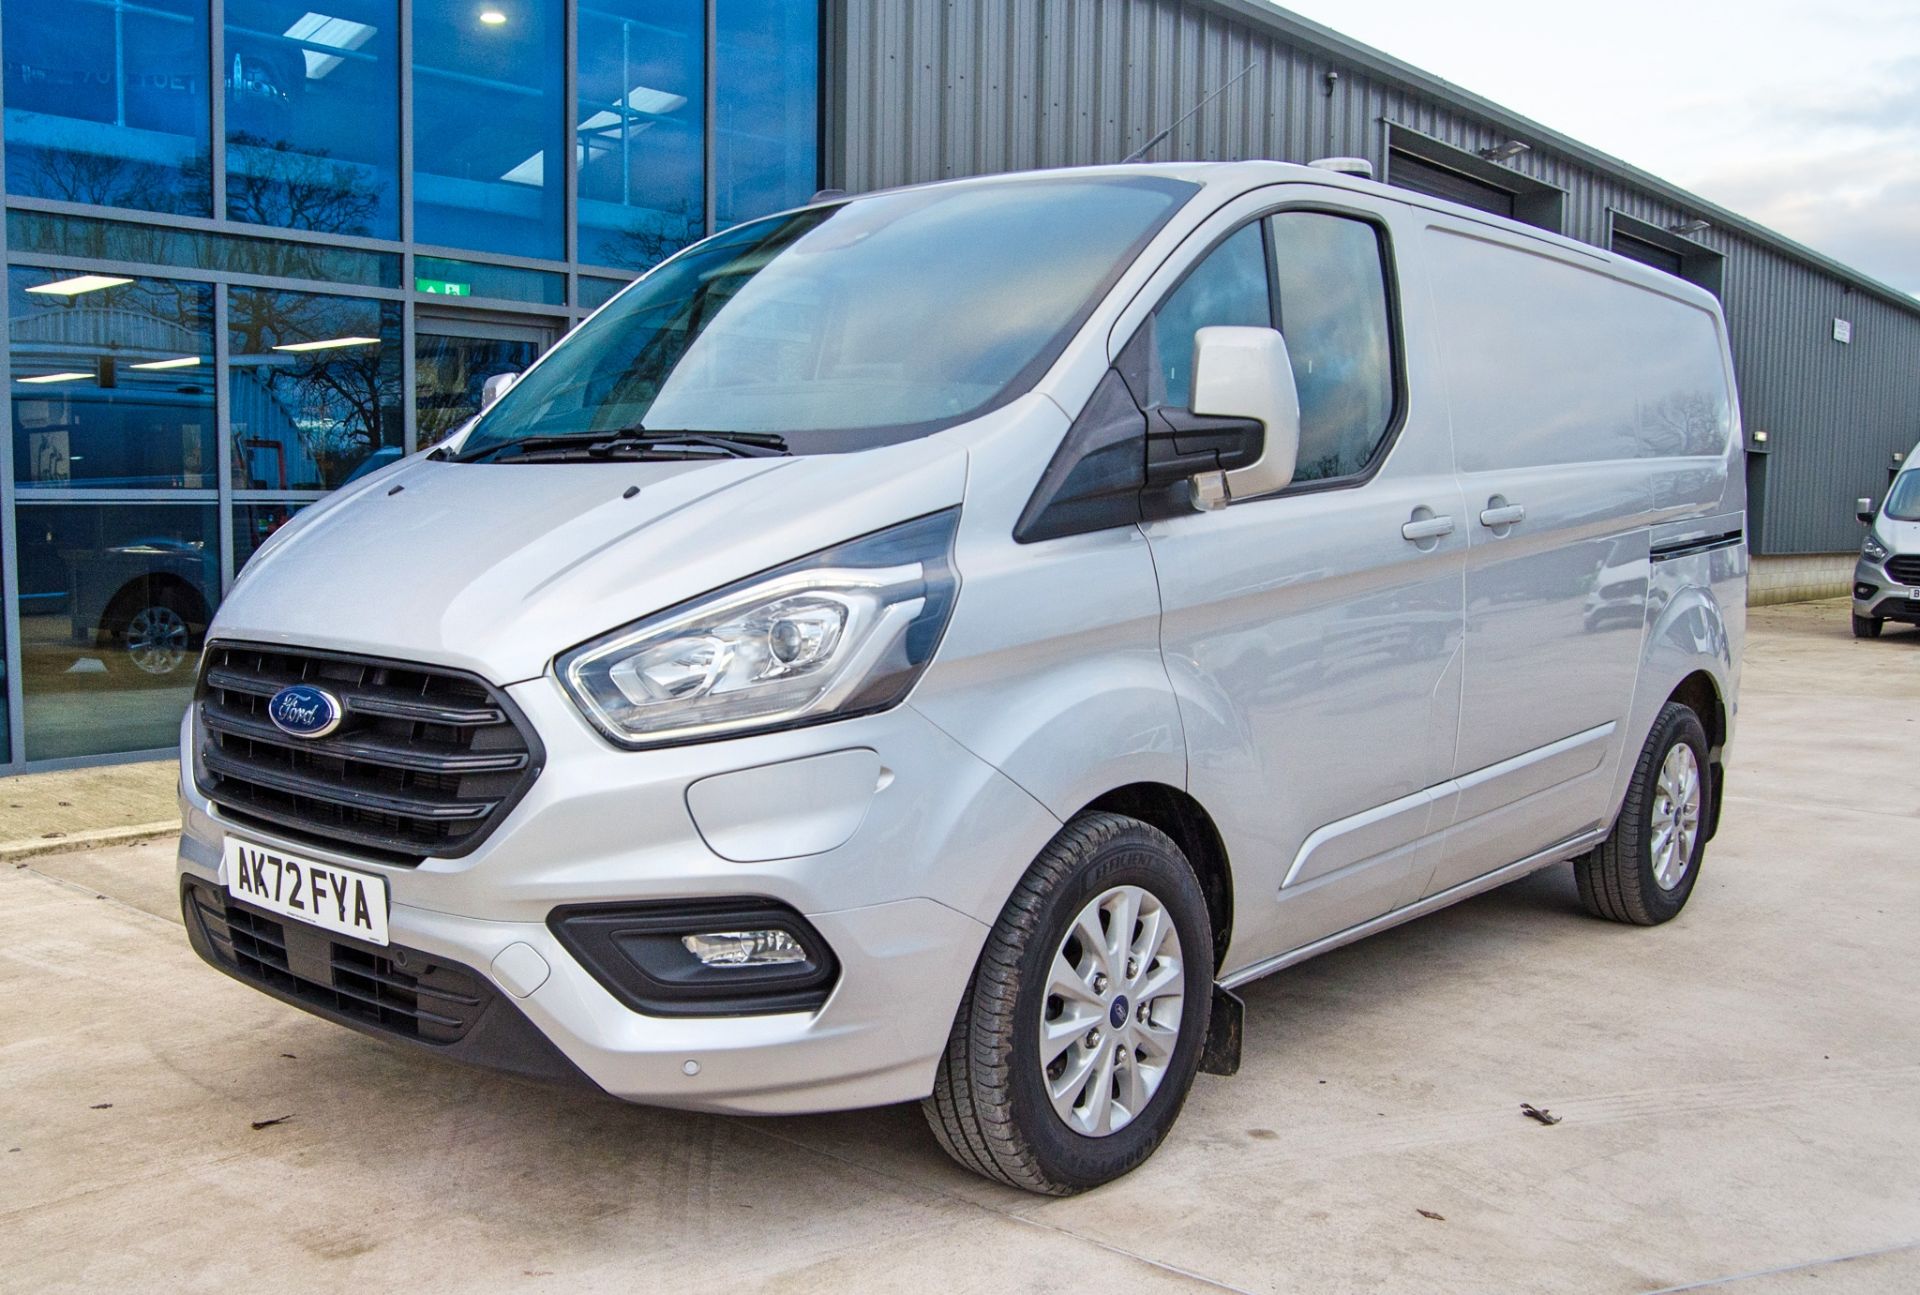 Ford Transit Custom 340 Trend L1 H1 Euro 6 plug in hybrid automatic window cleaning converted